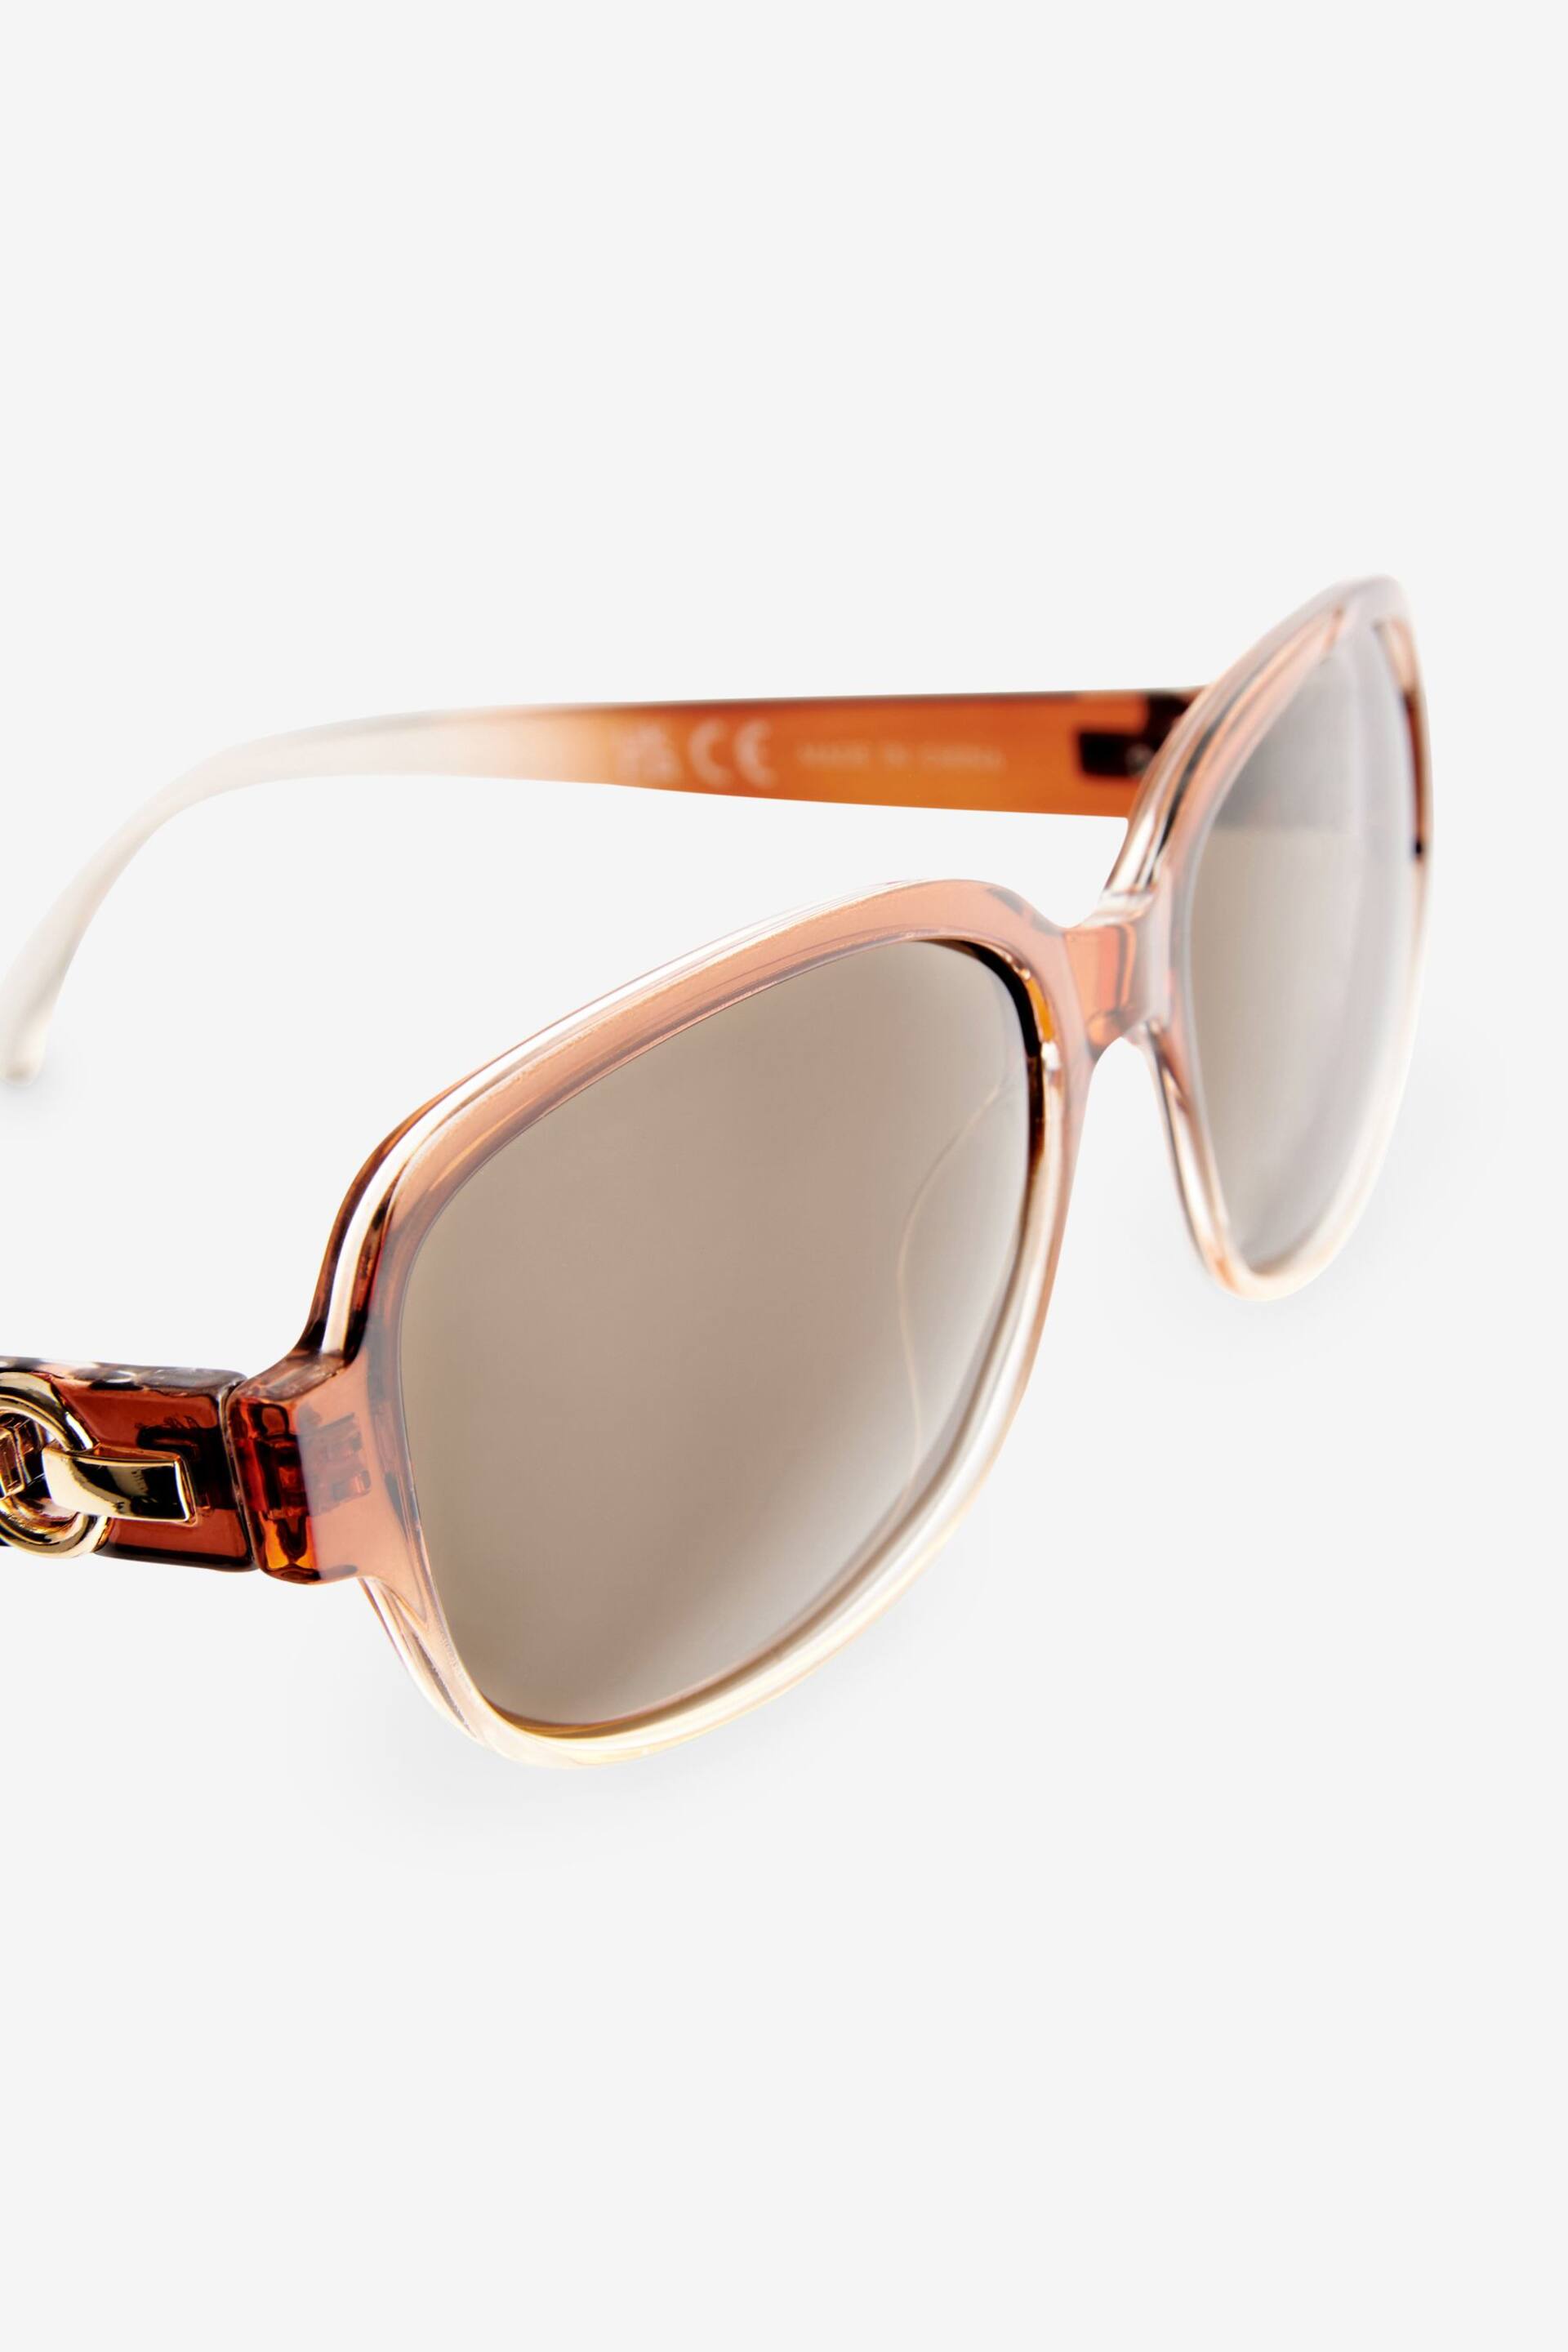 Toffee Brown Polarised Small Square Sunglasses - Image 4 of 5